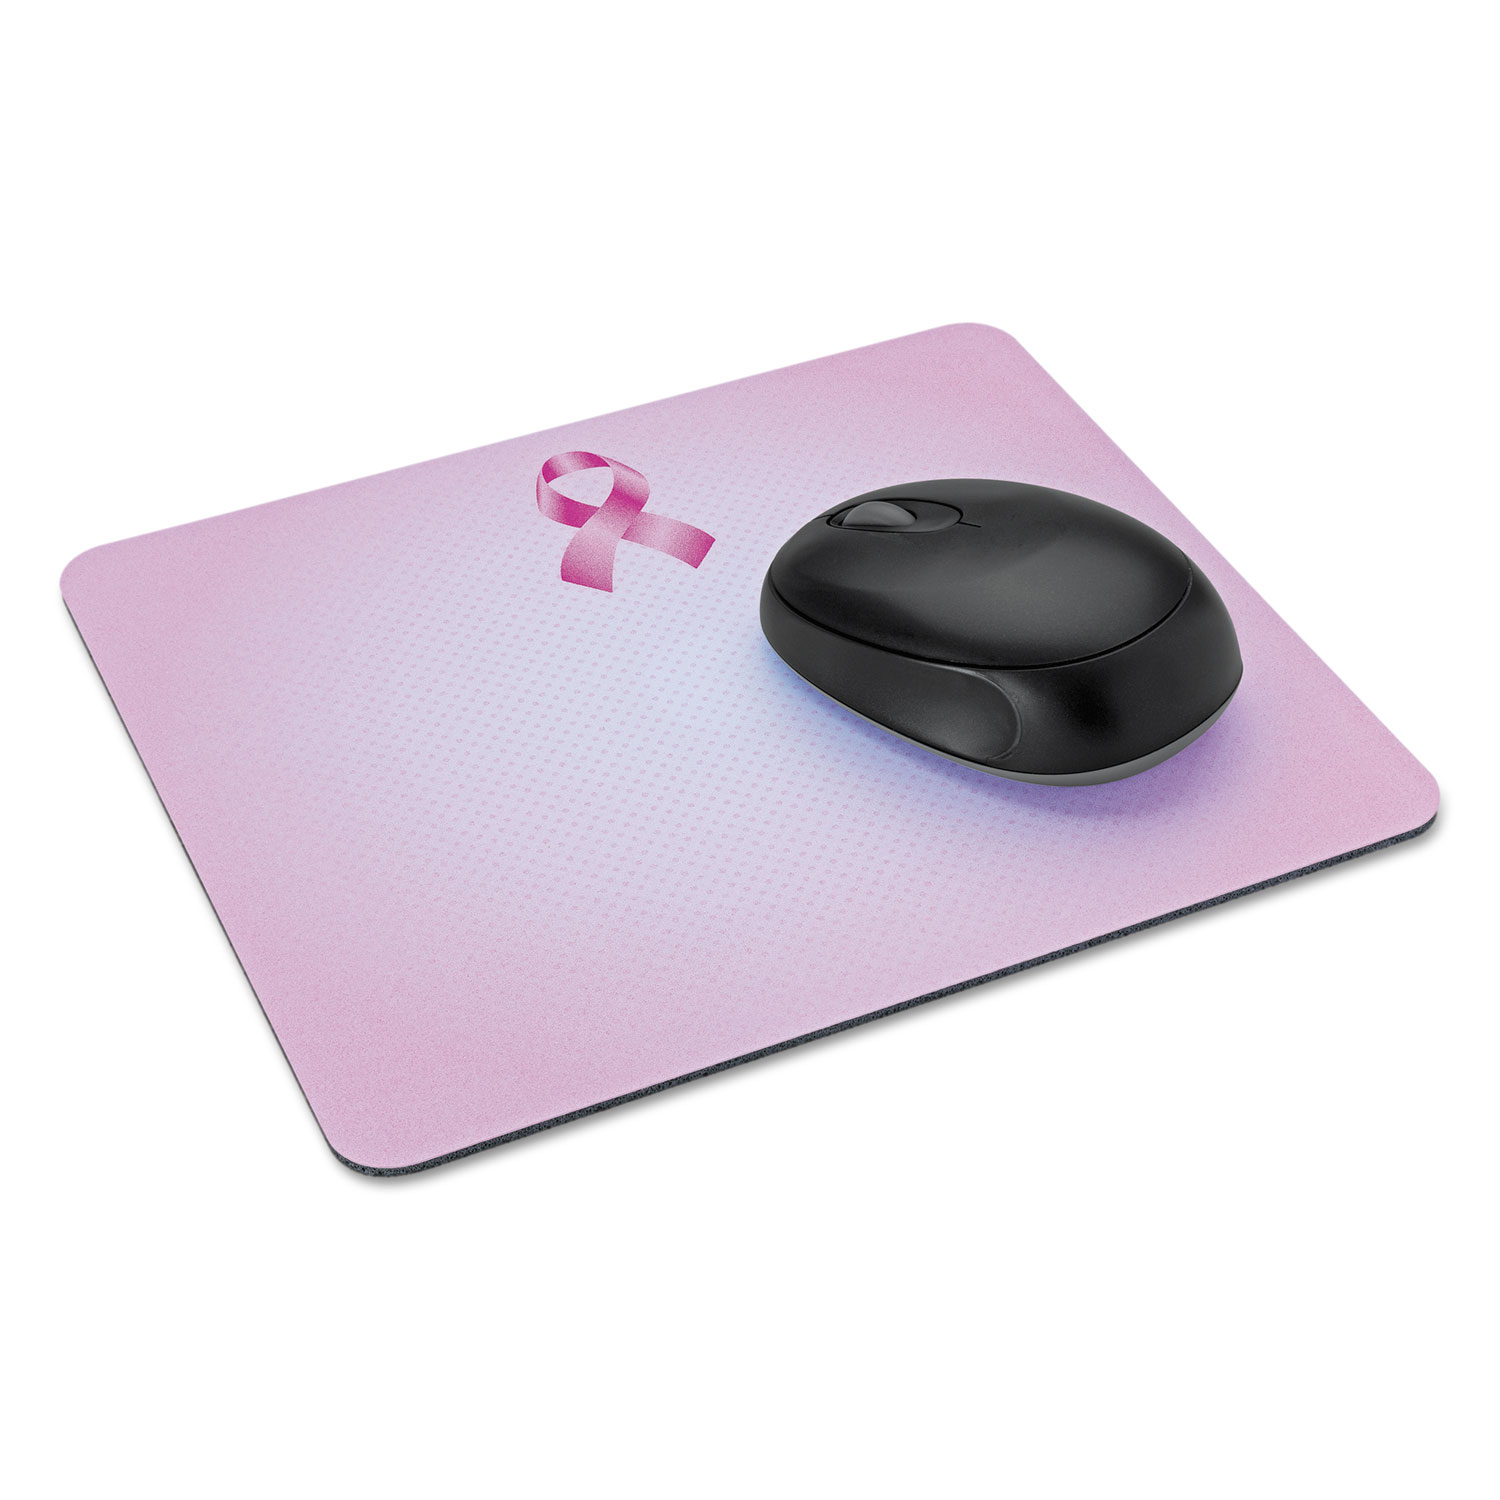 Mouse Pad with Precise Mousing Surface, 9 x 8 x 1/4, Pink Ribbon Design